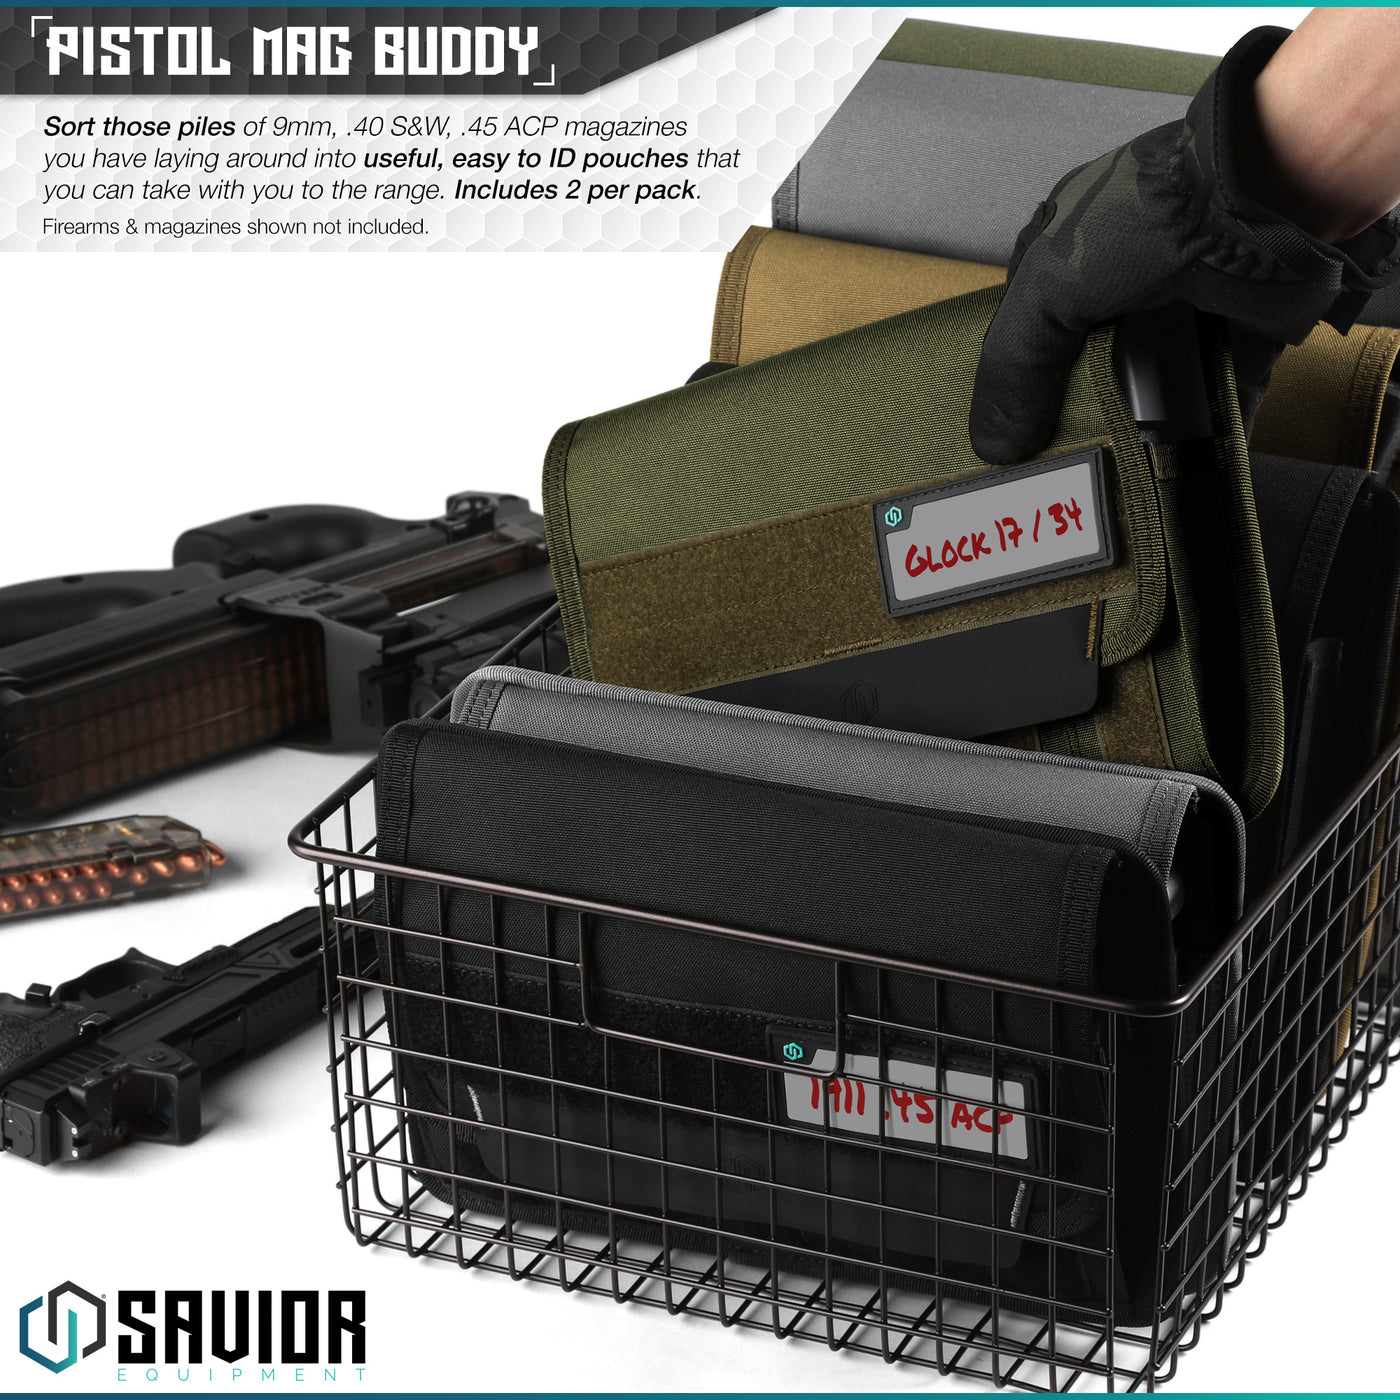 Pistol Mag Buddy - Sort those piles of 9mm, .40 S&W, .45 ACP magazines you have laying around into useful, easy to ID pouches that you can take with you to the range. Includes 2 per pack. Firearms & magazines shown not included.